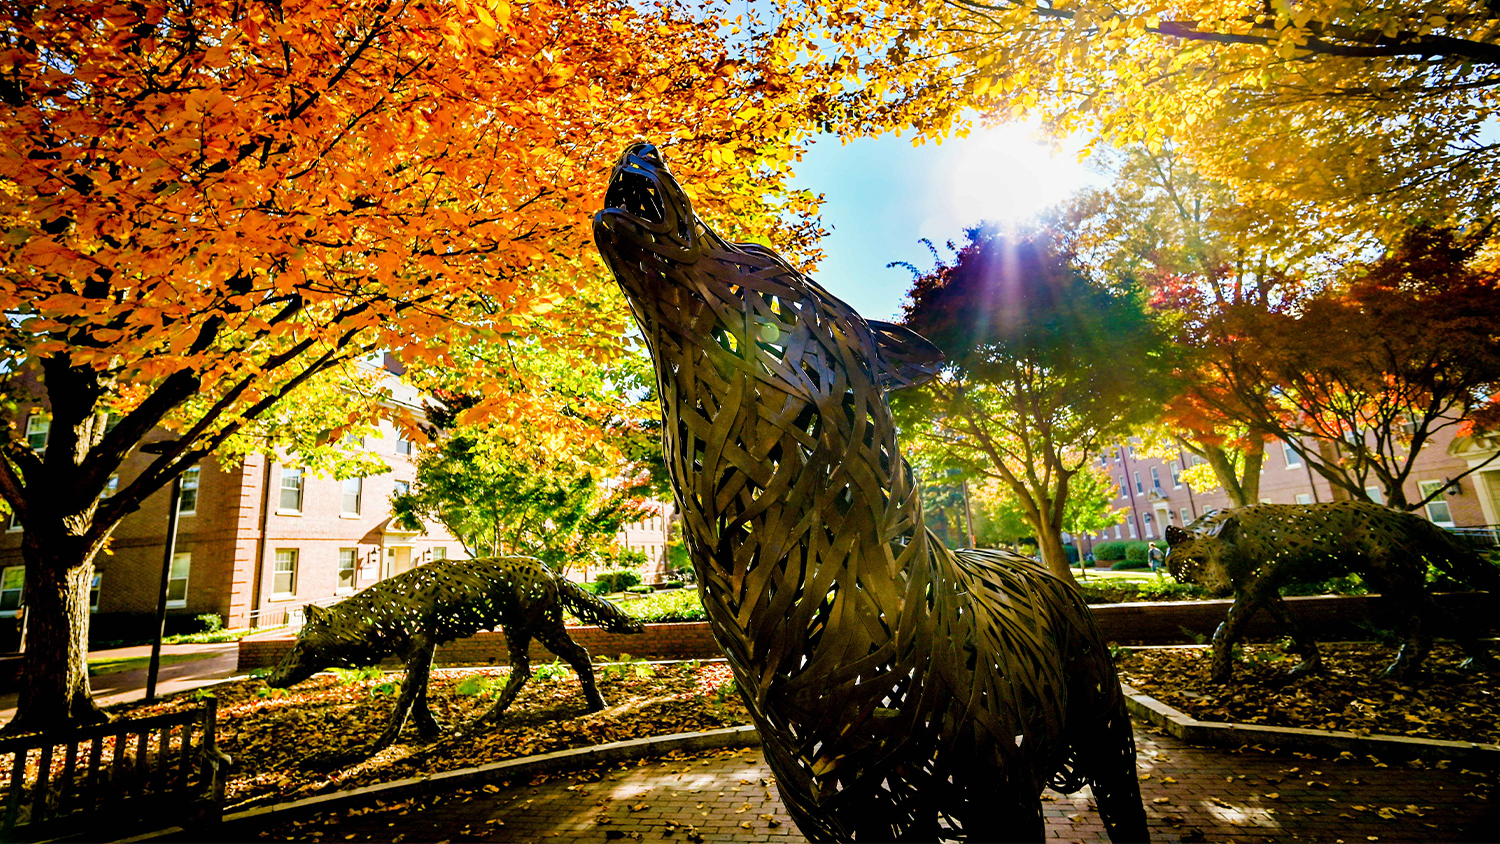 Afternoon sunlight streams through the fall foliage at Wolf Plaza.